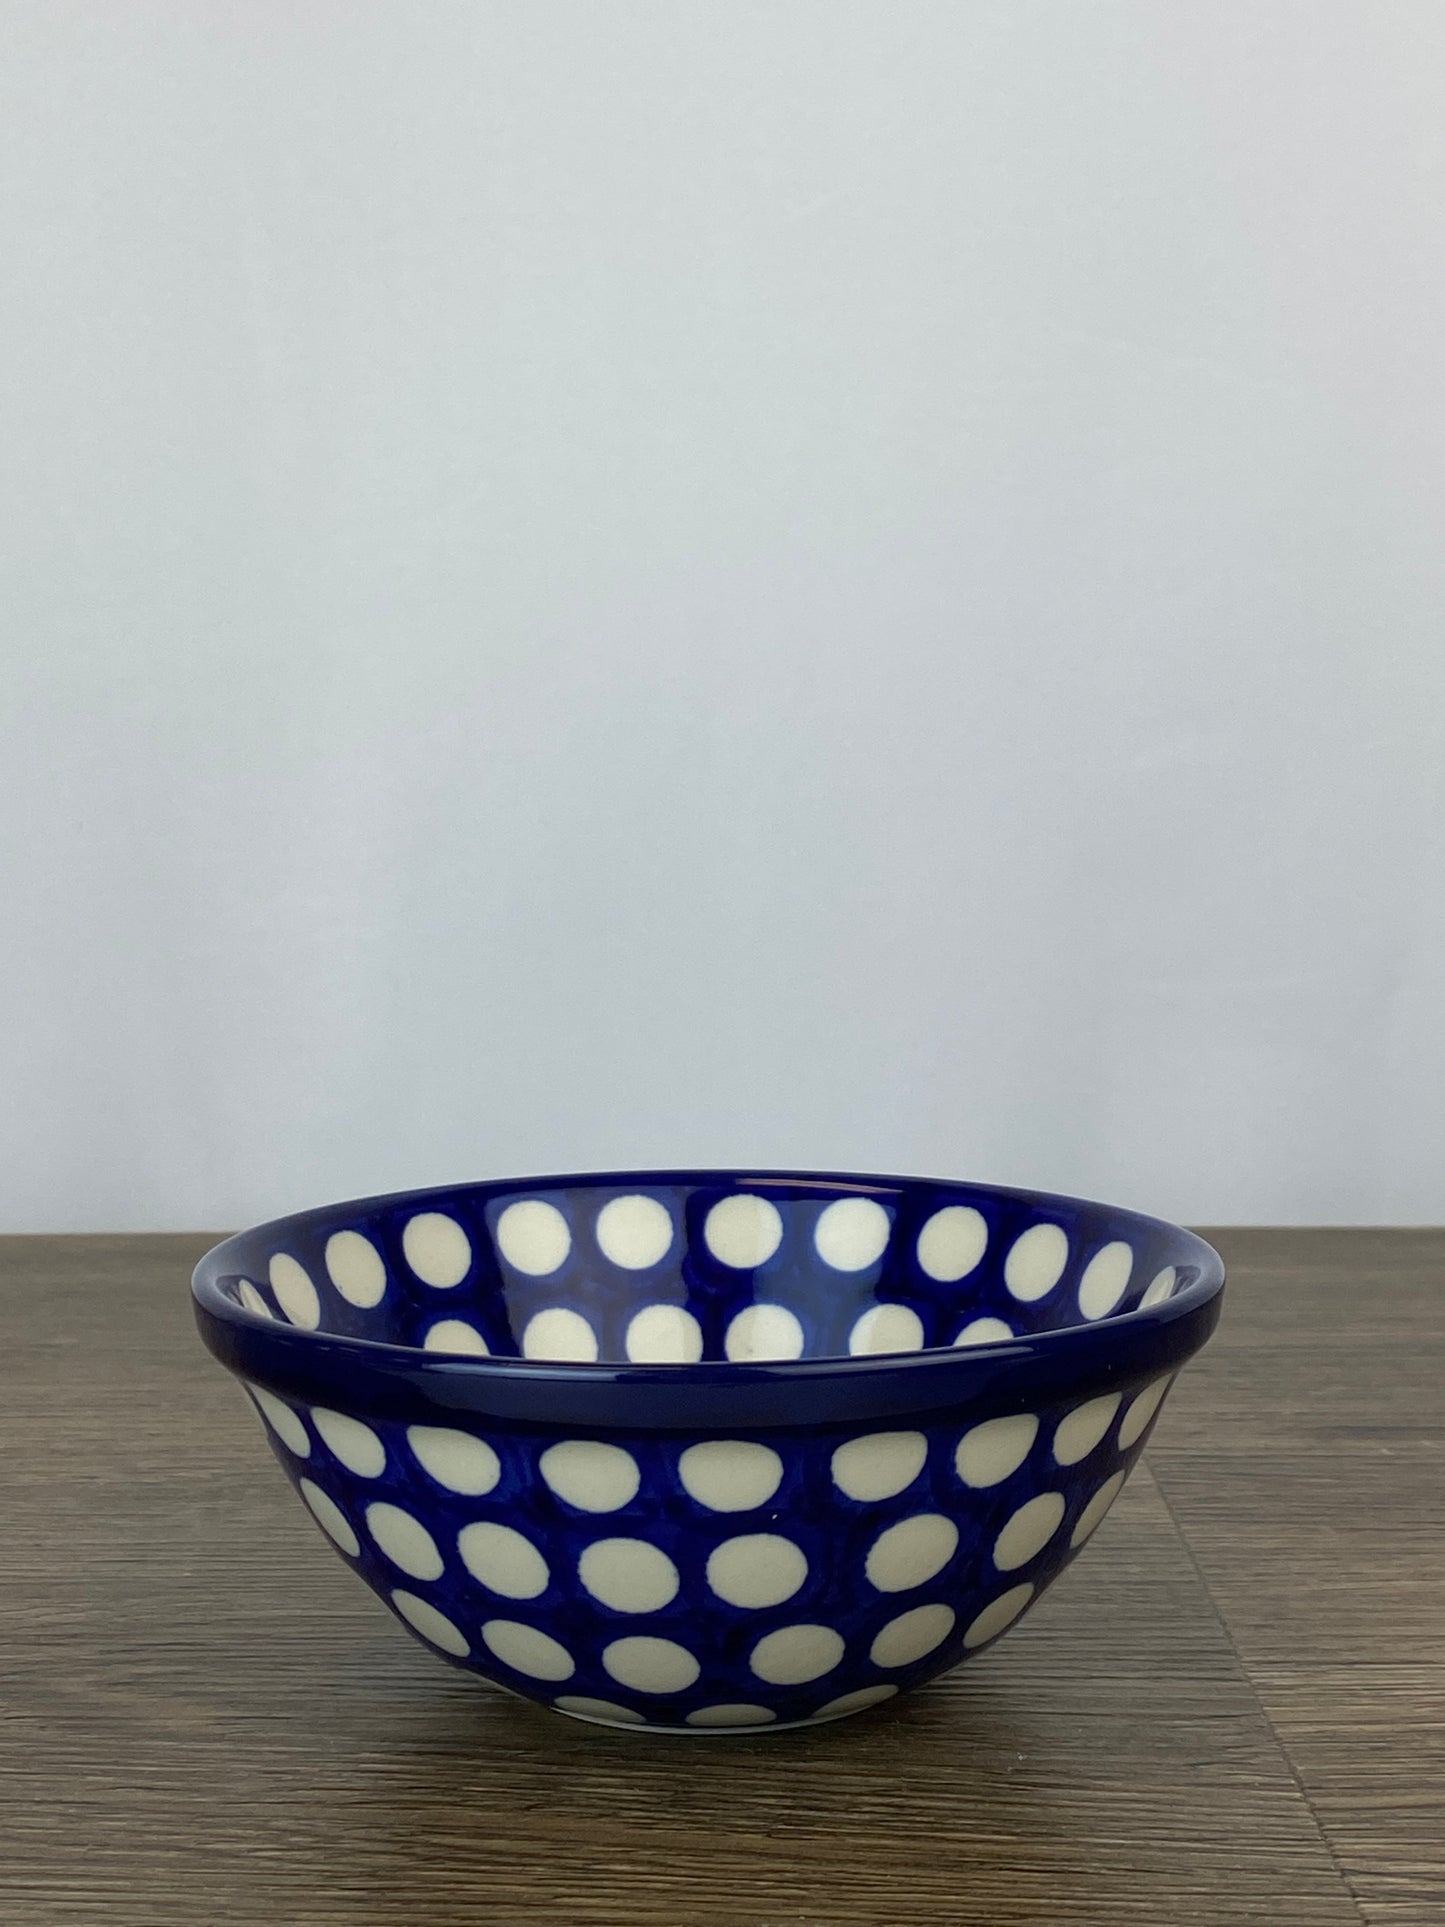 Small Cereal Bowl - Shape 59 - Pattern 2728